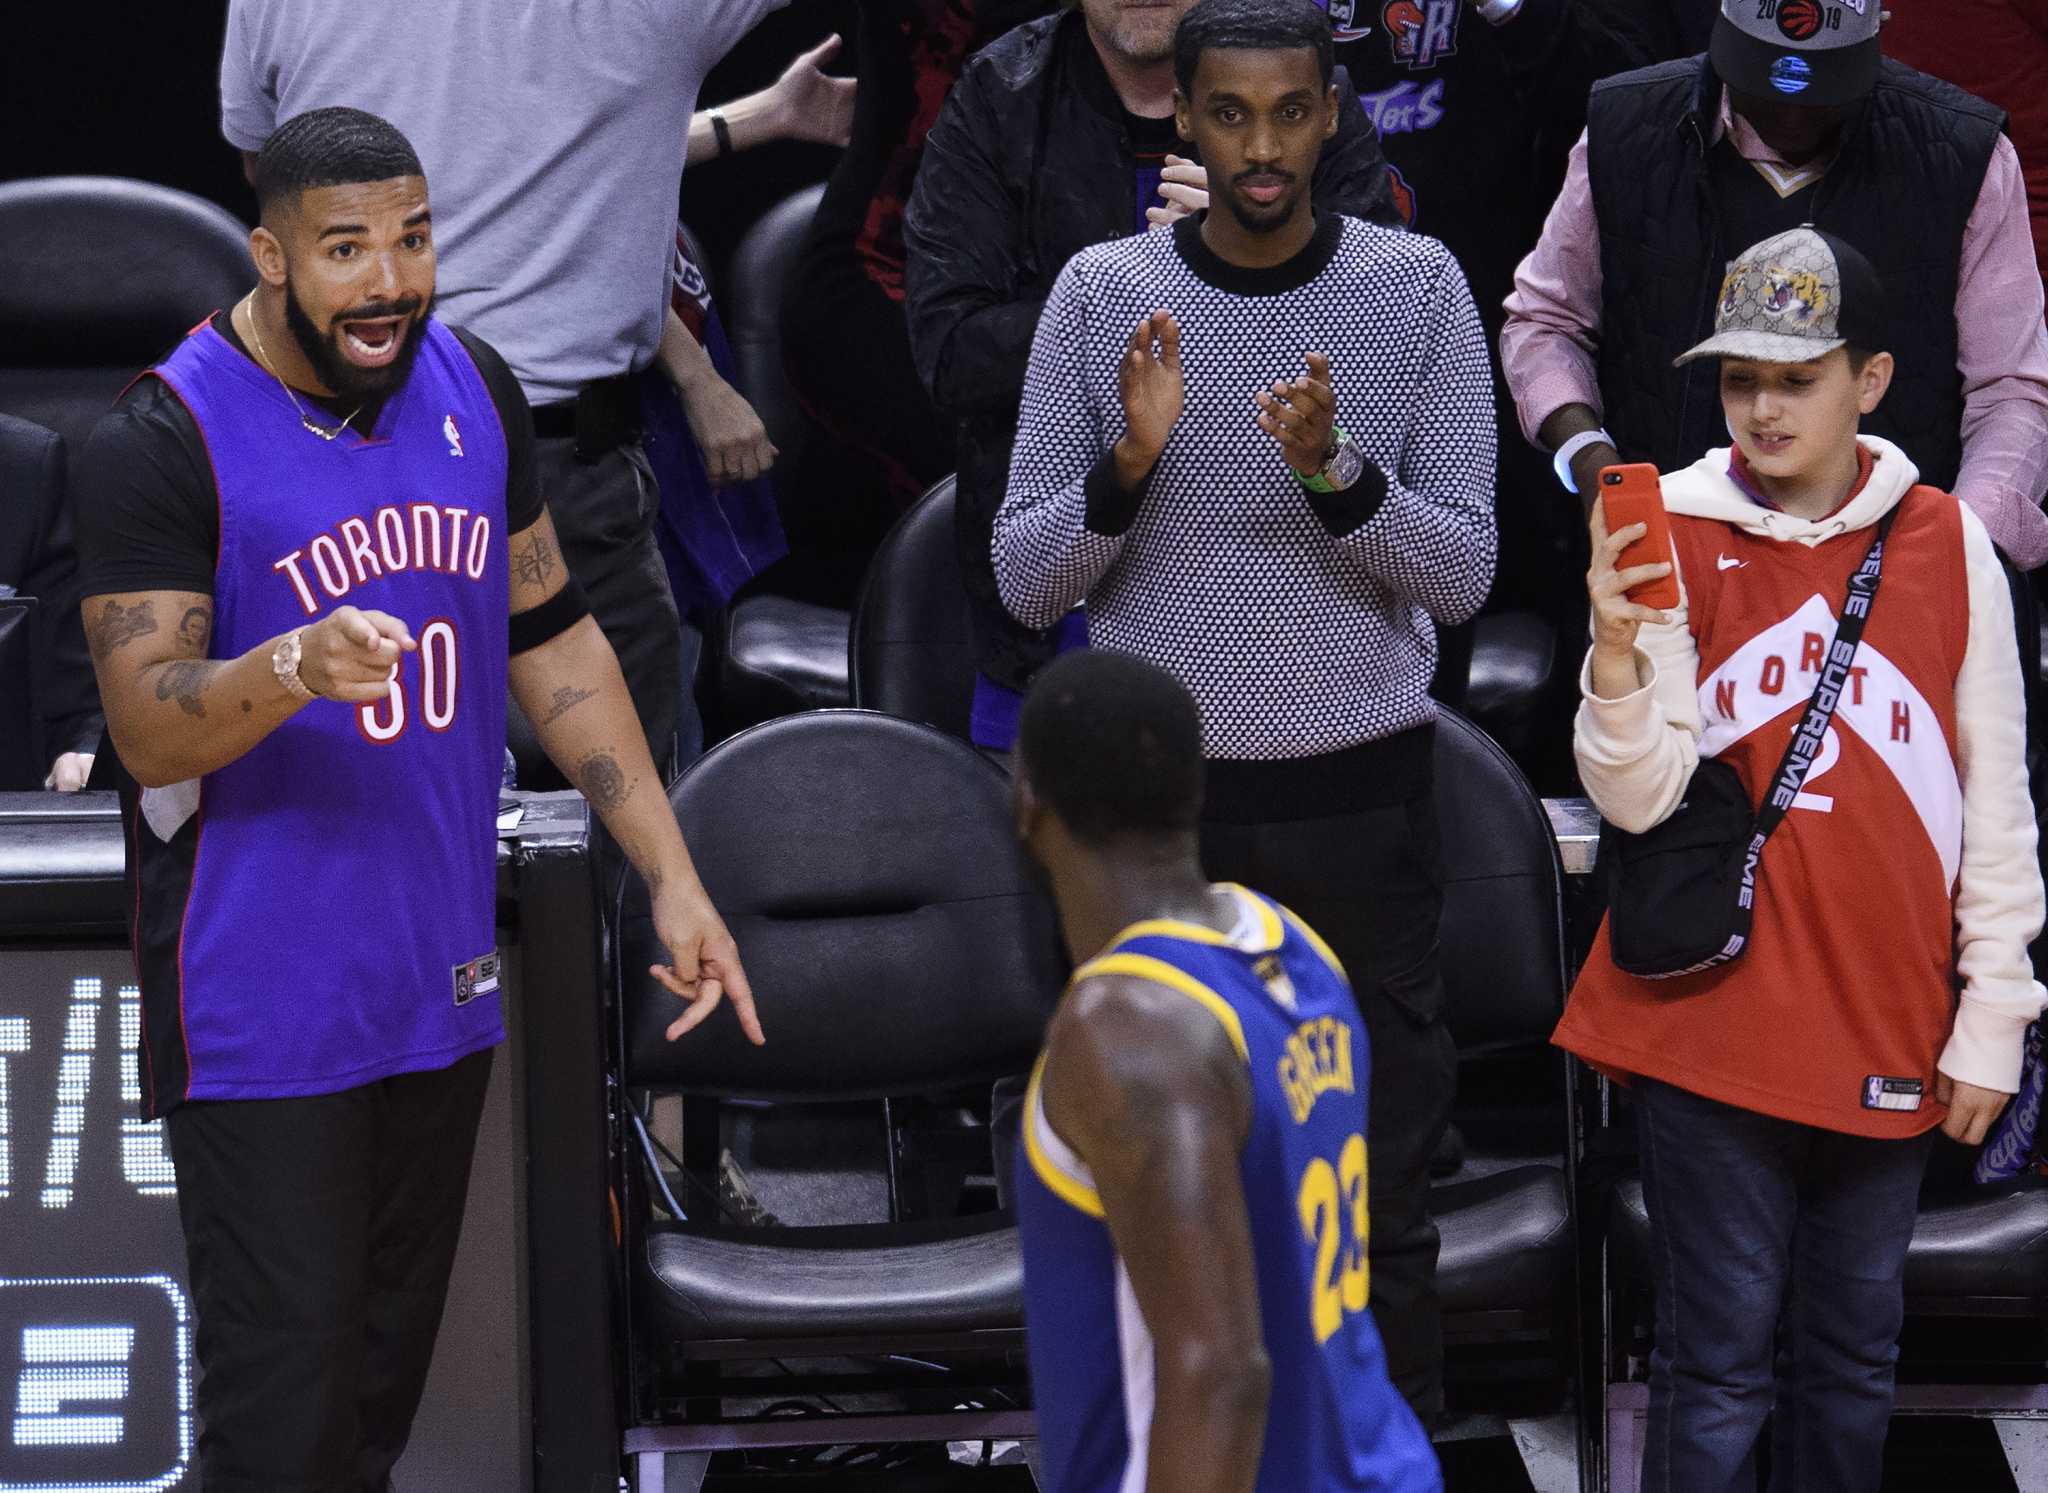 Tracy McGrady reacts to Drake's Dell Curry Raptors jersey from Game 1